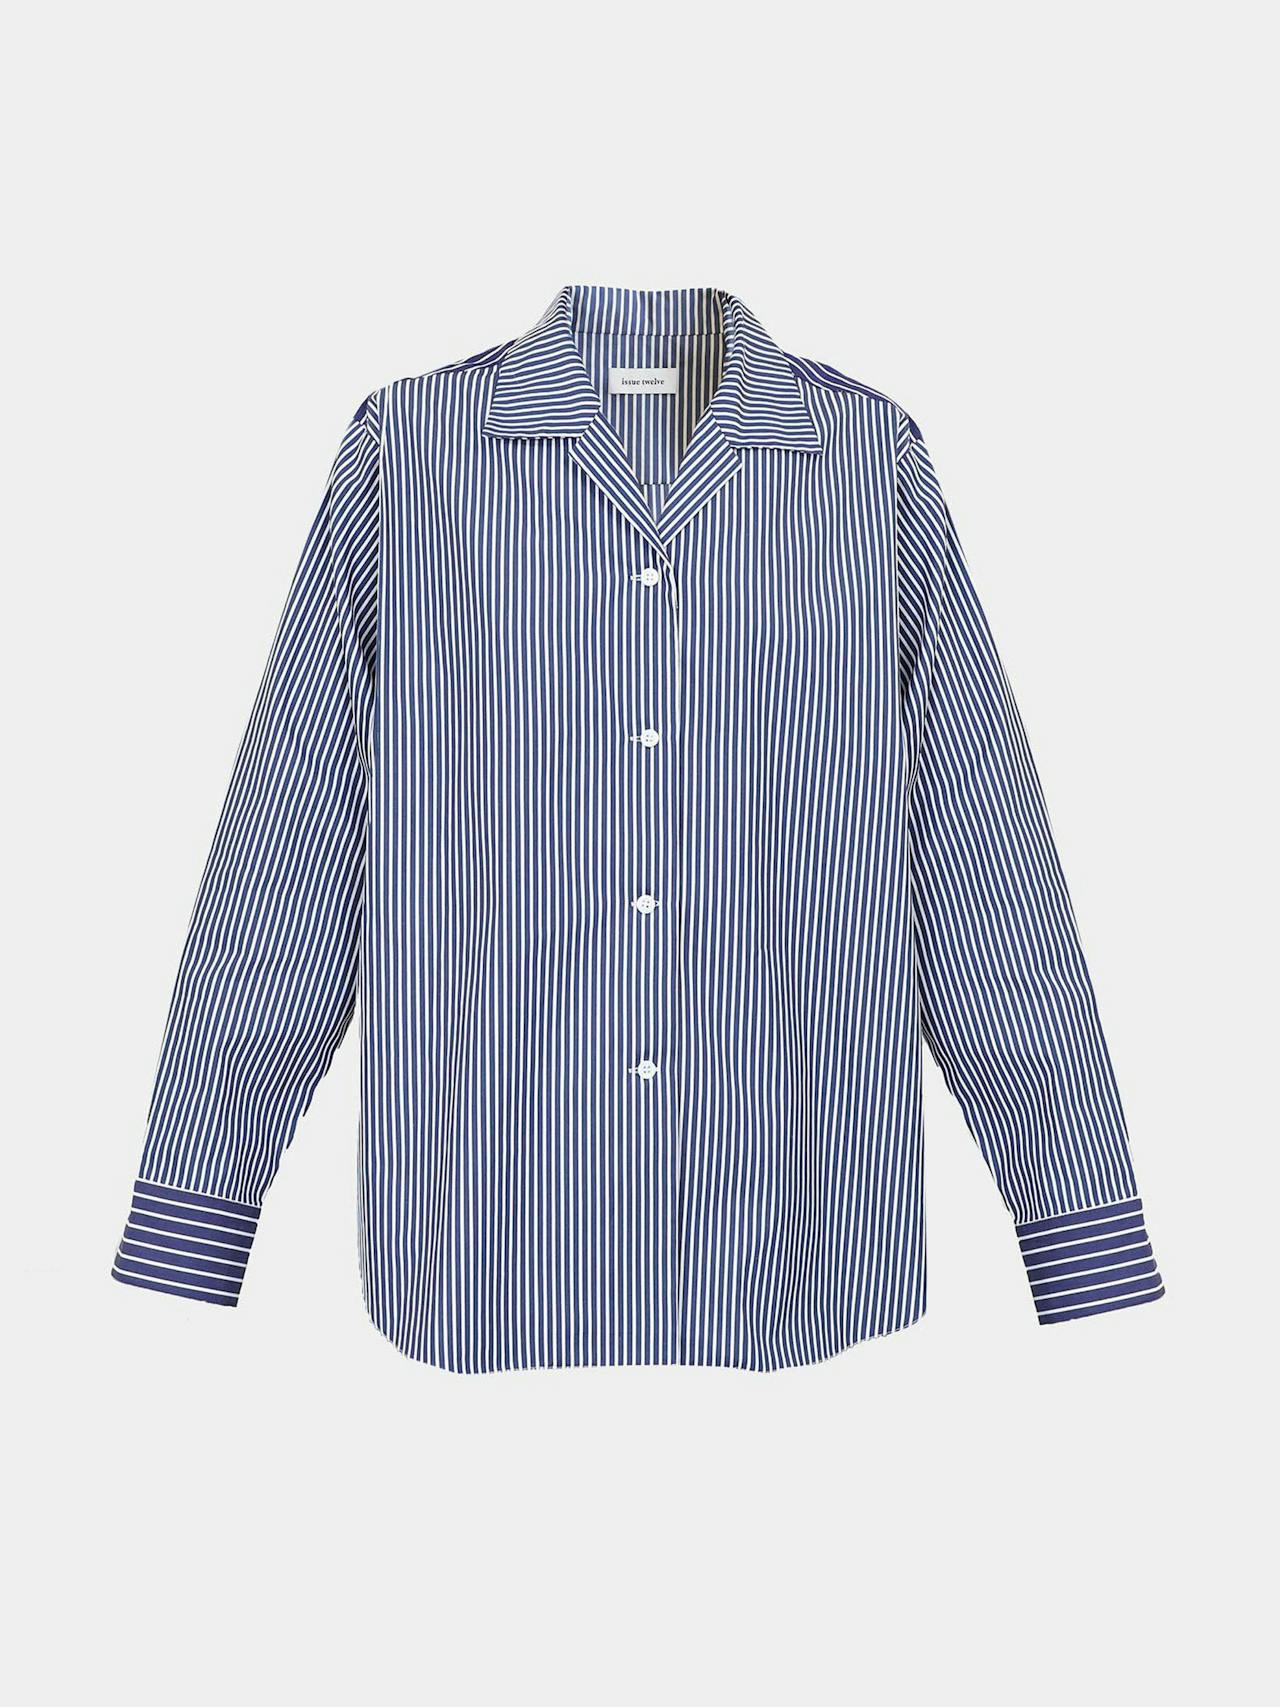 The Milo blue stripe shirt is generous in the body, fitted with a camp collar and curved hem. A great addition to the Autumn Winter wardrobe. Collagerie.com